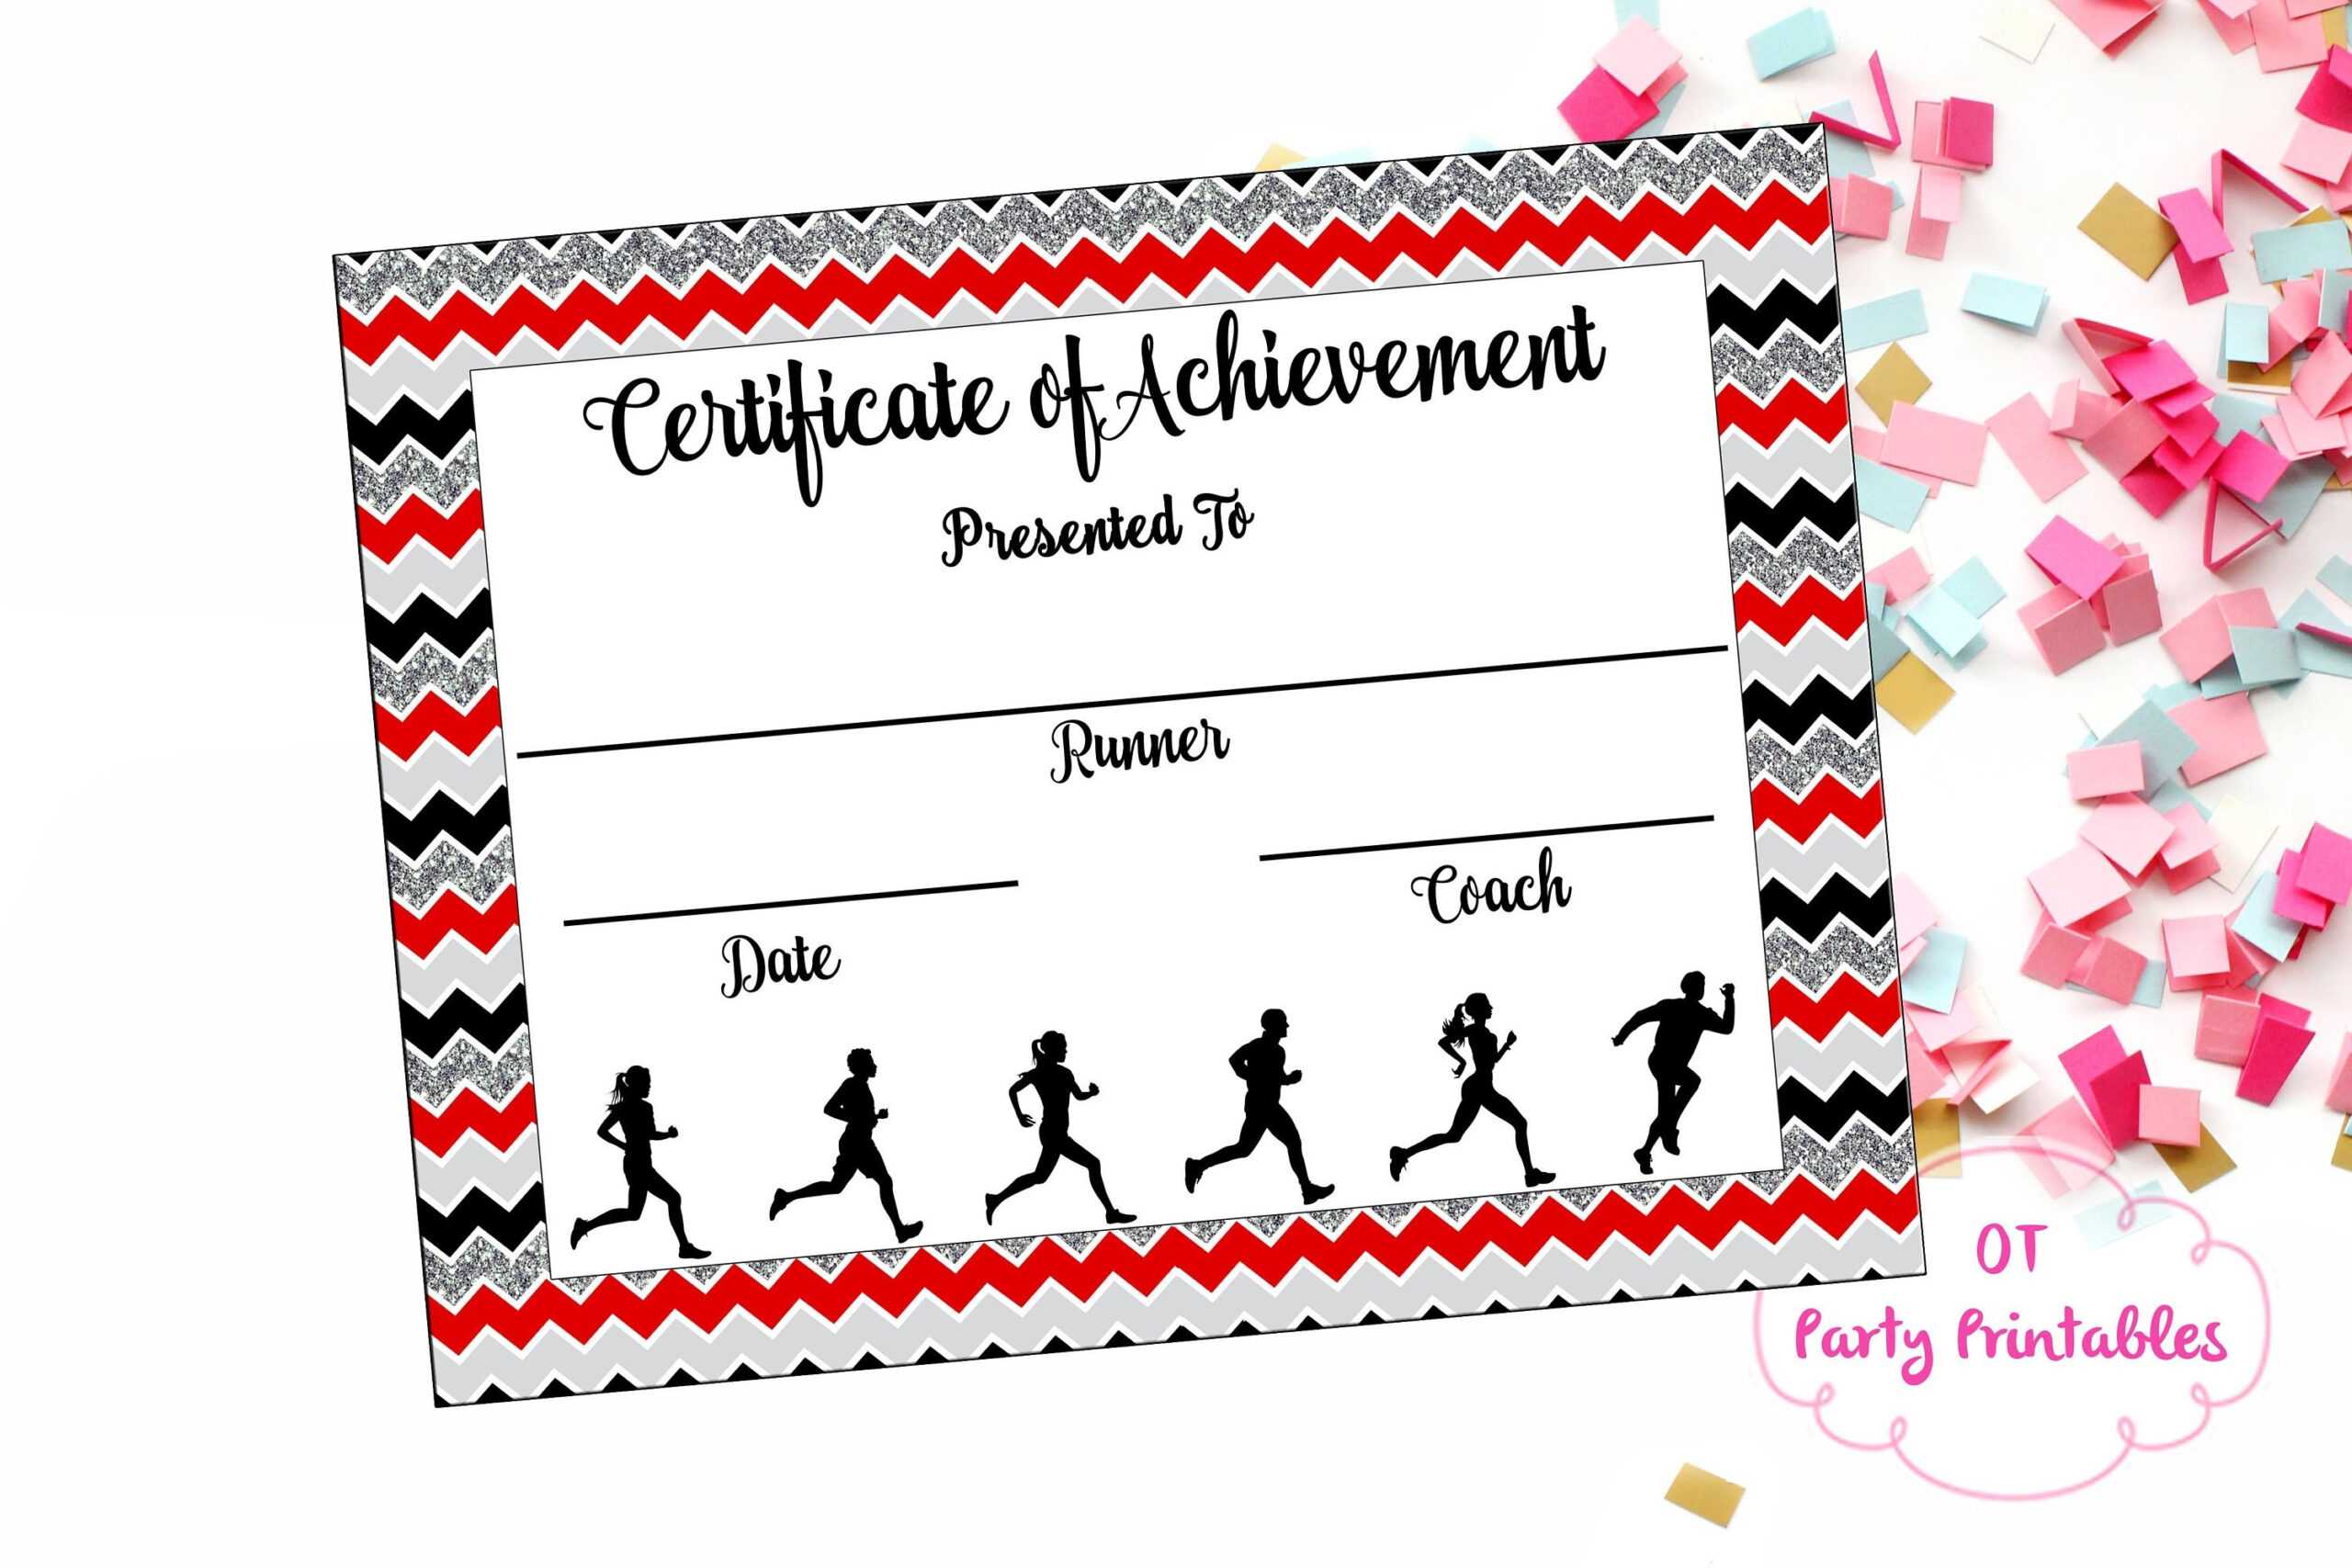 Cross Country Certificate Templates Free Flocker Info Throughout Track And Field Certificate Templates Free